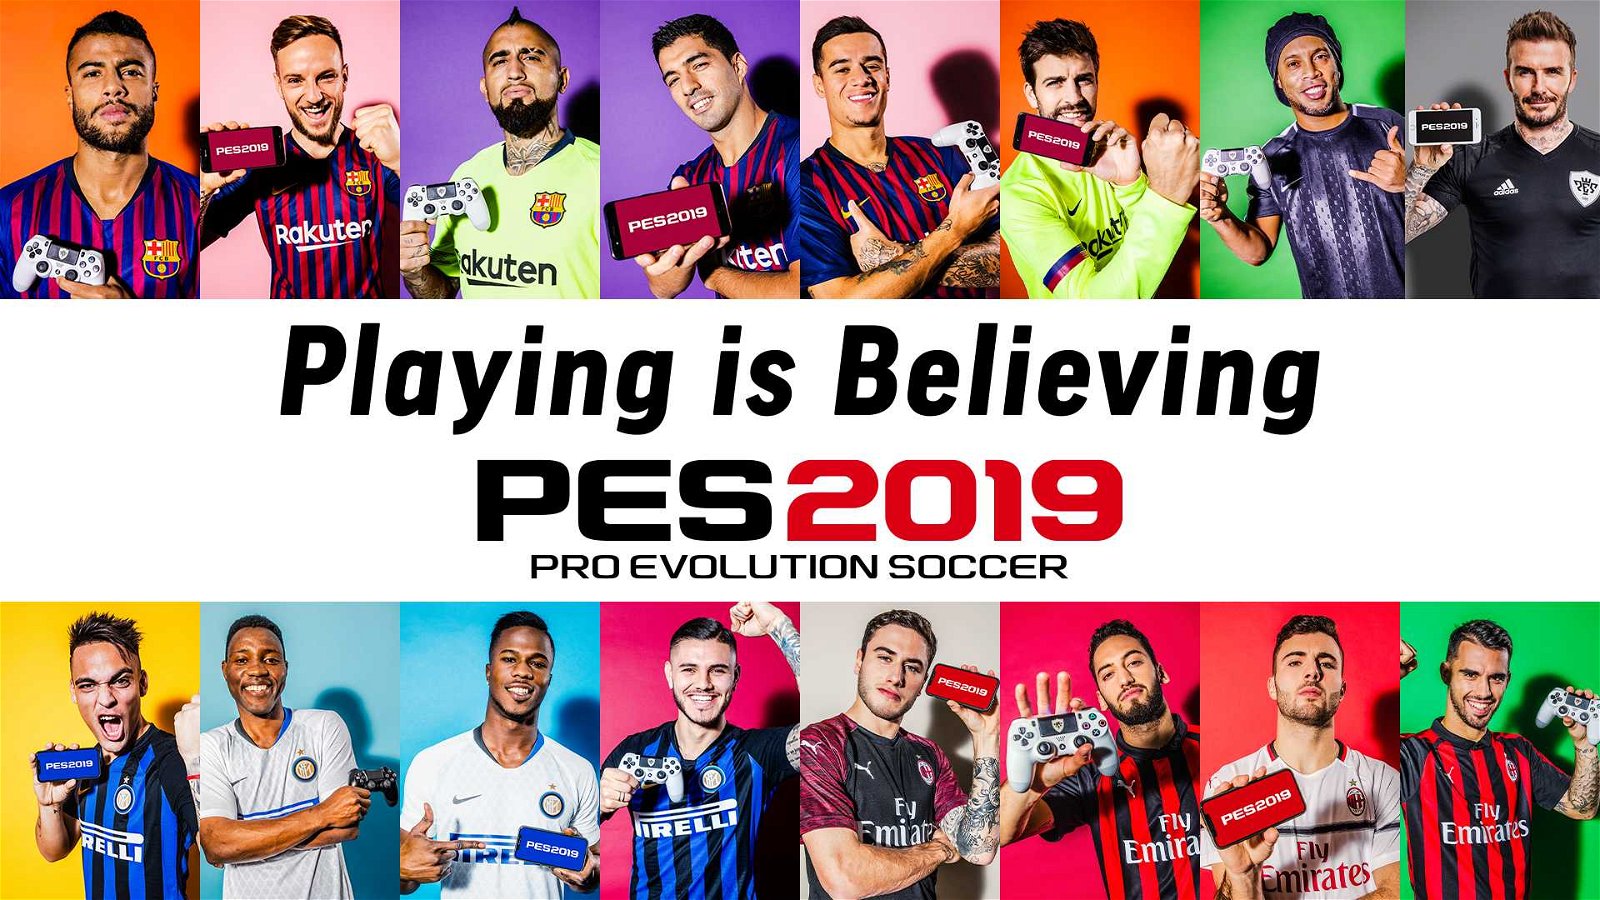 PES 2019: Uno spot TV annuncia la campagna Playing Is Believing